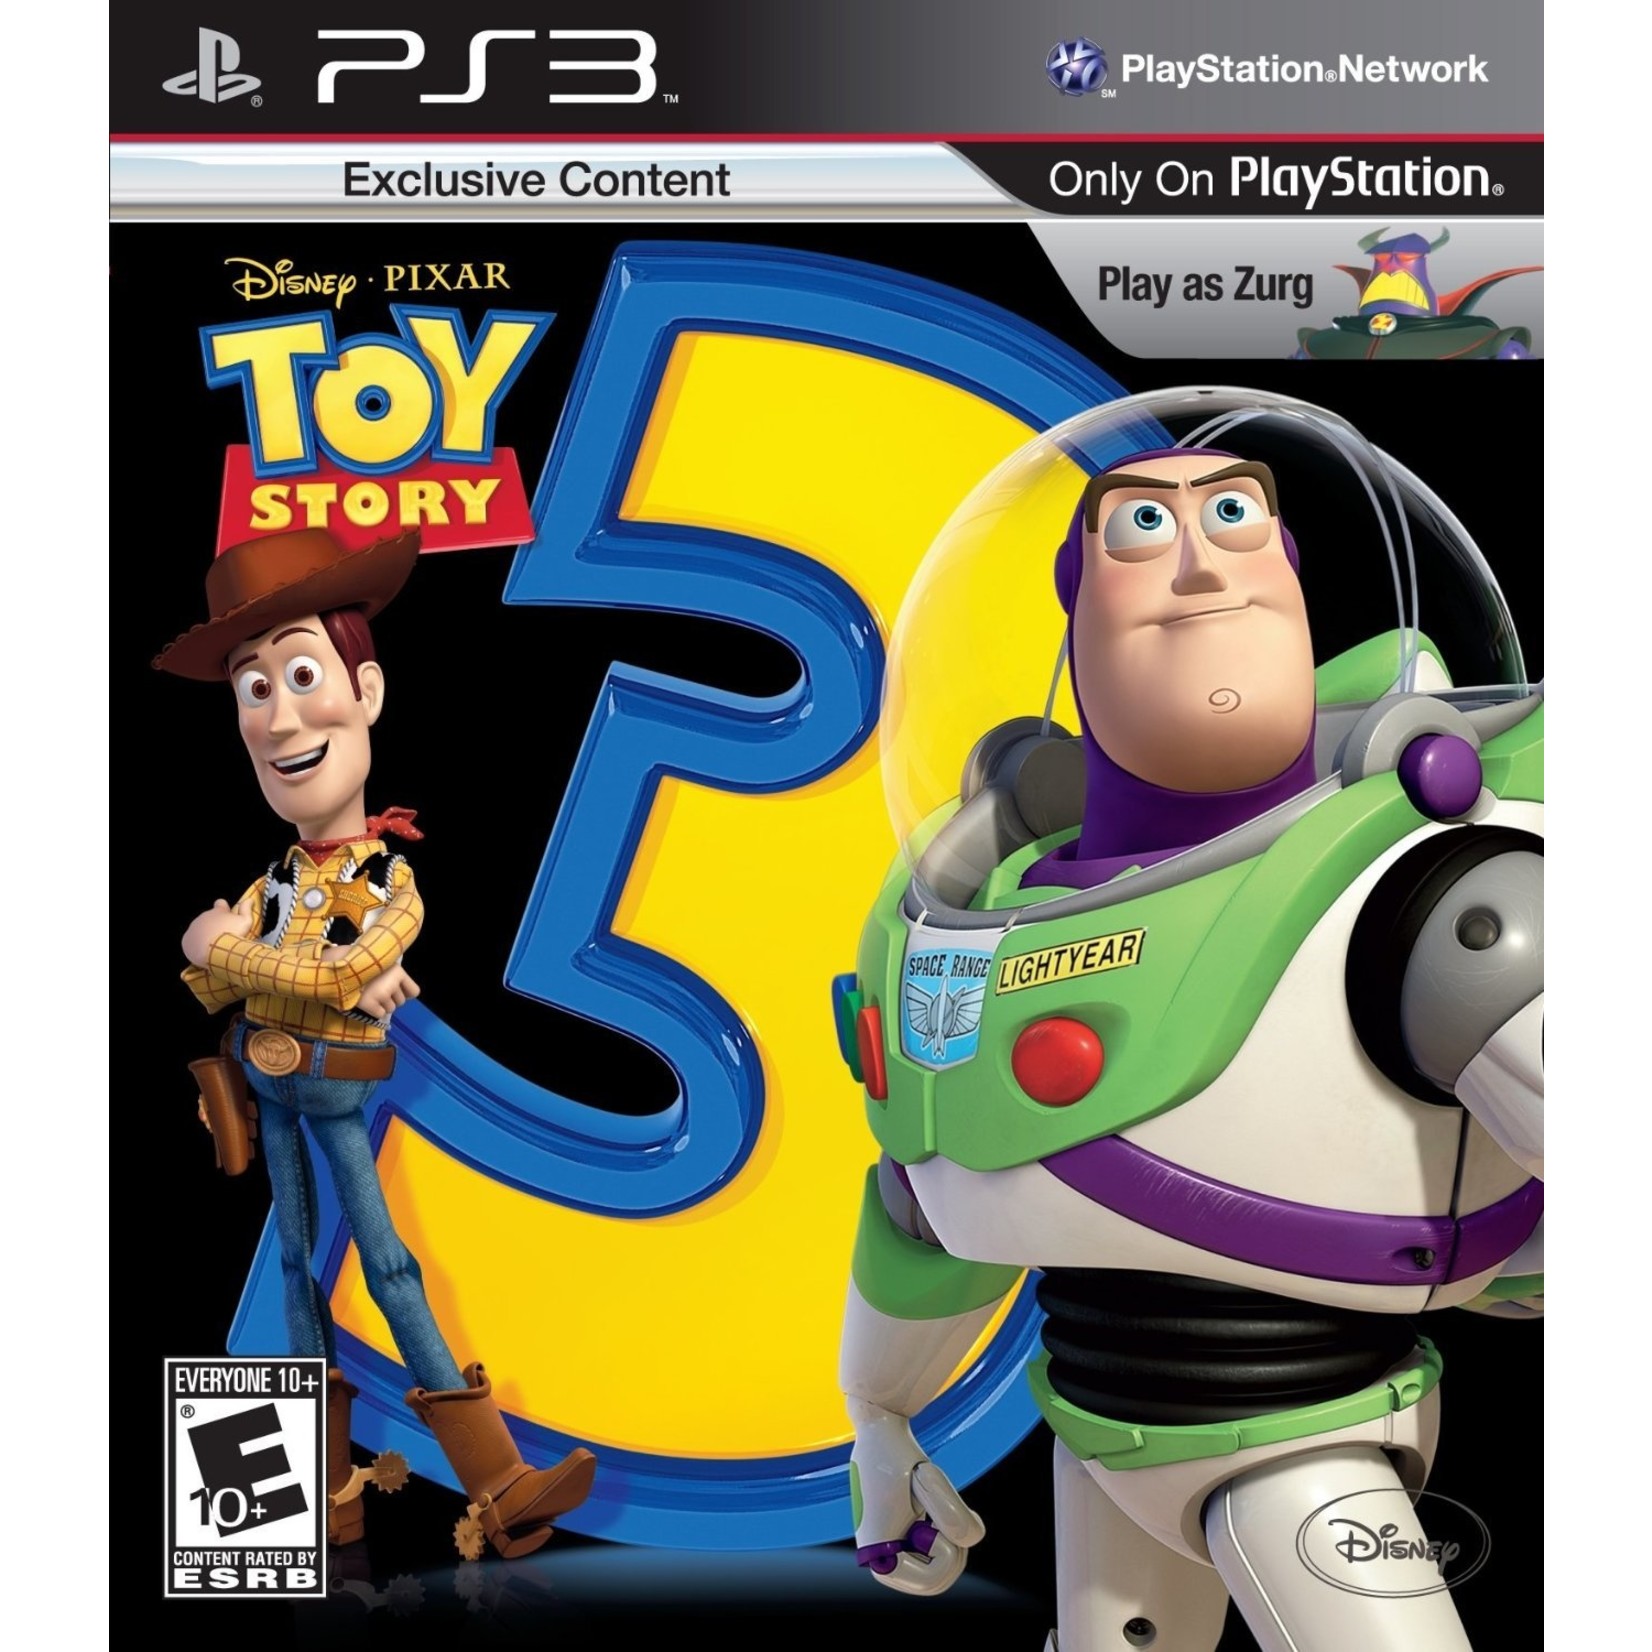 PS3U-TOY STORY 3